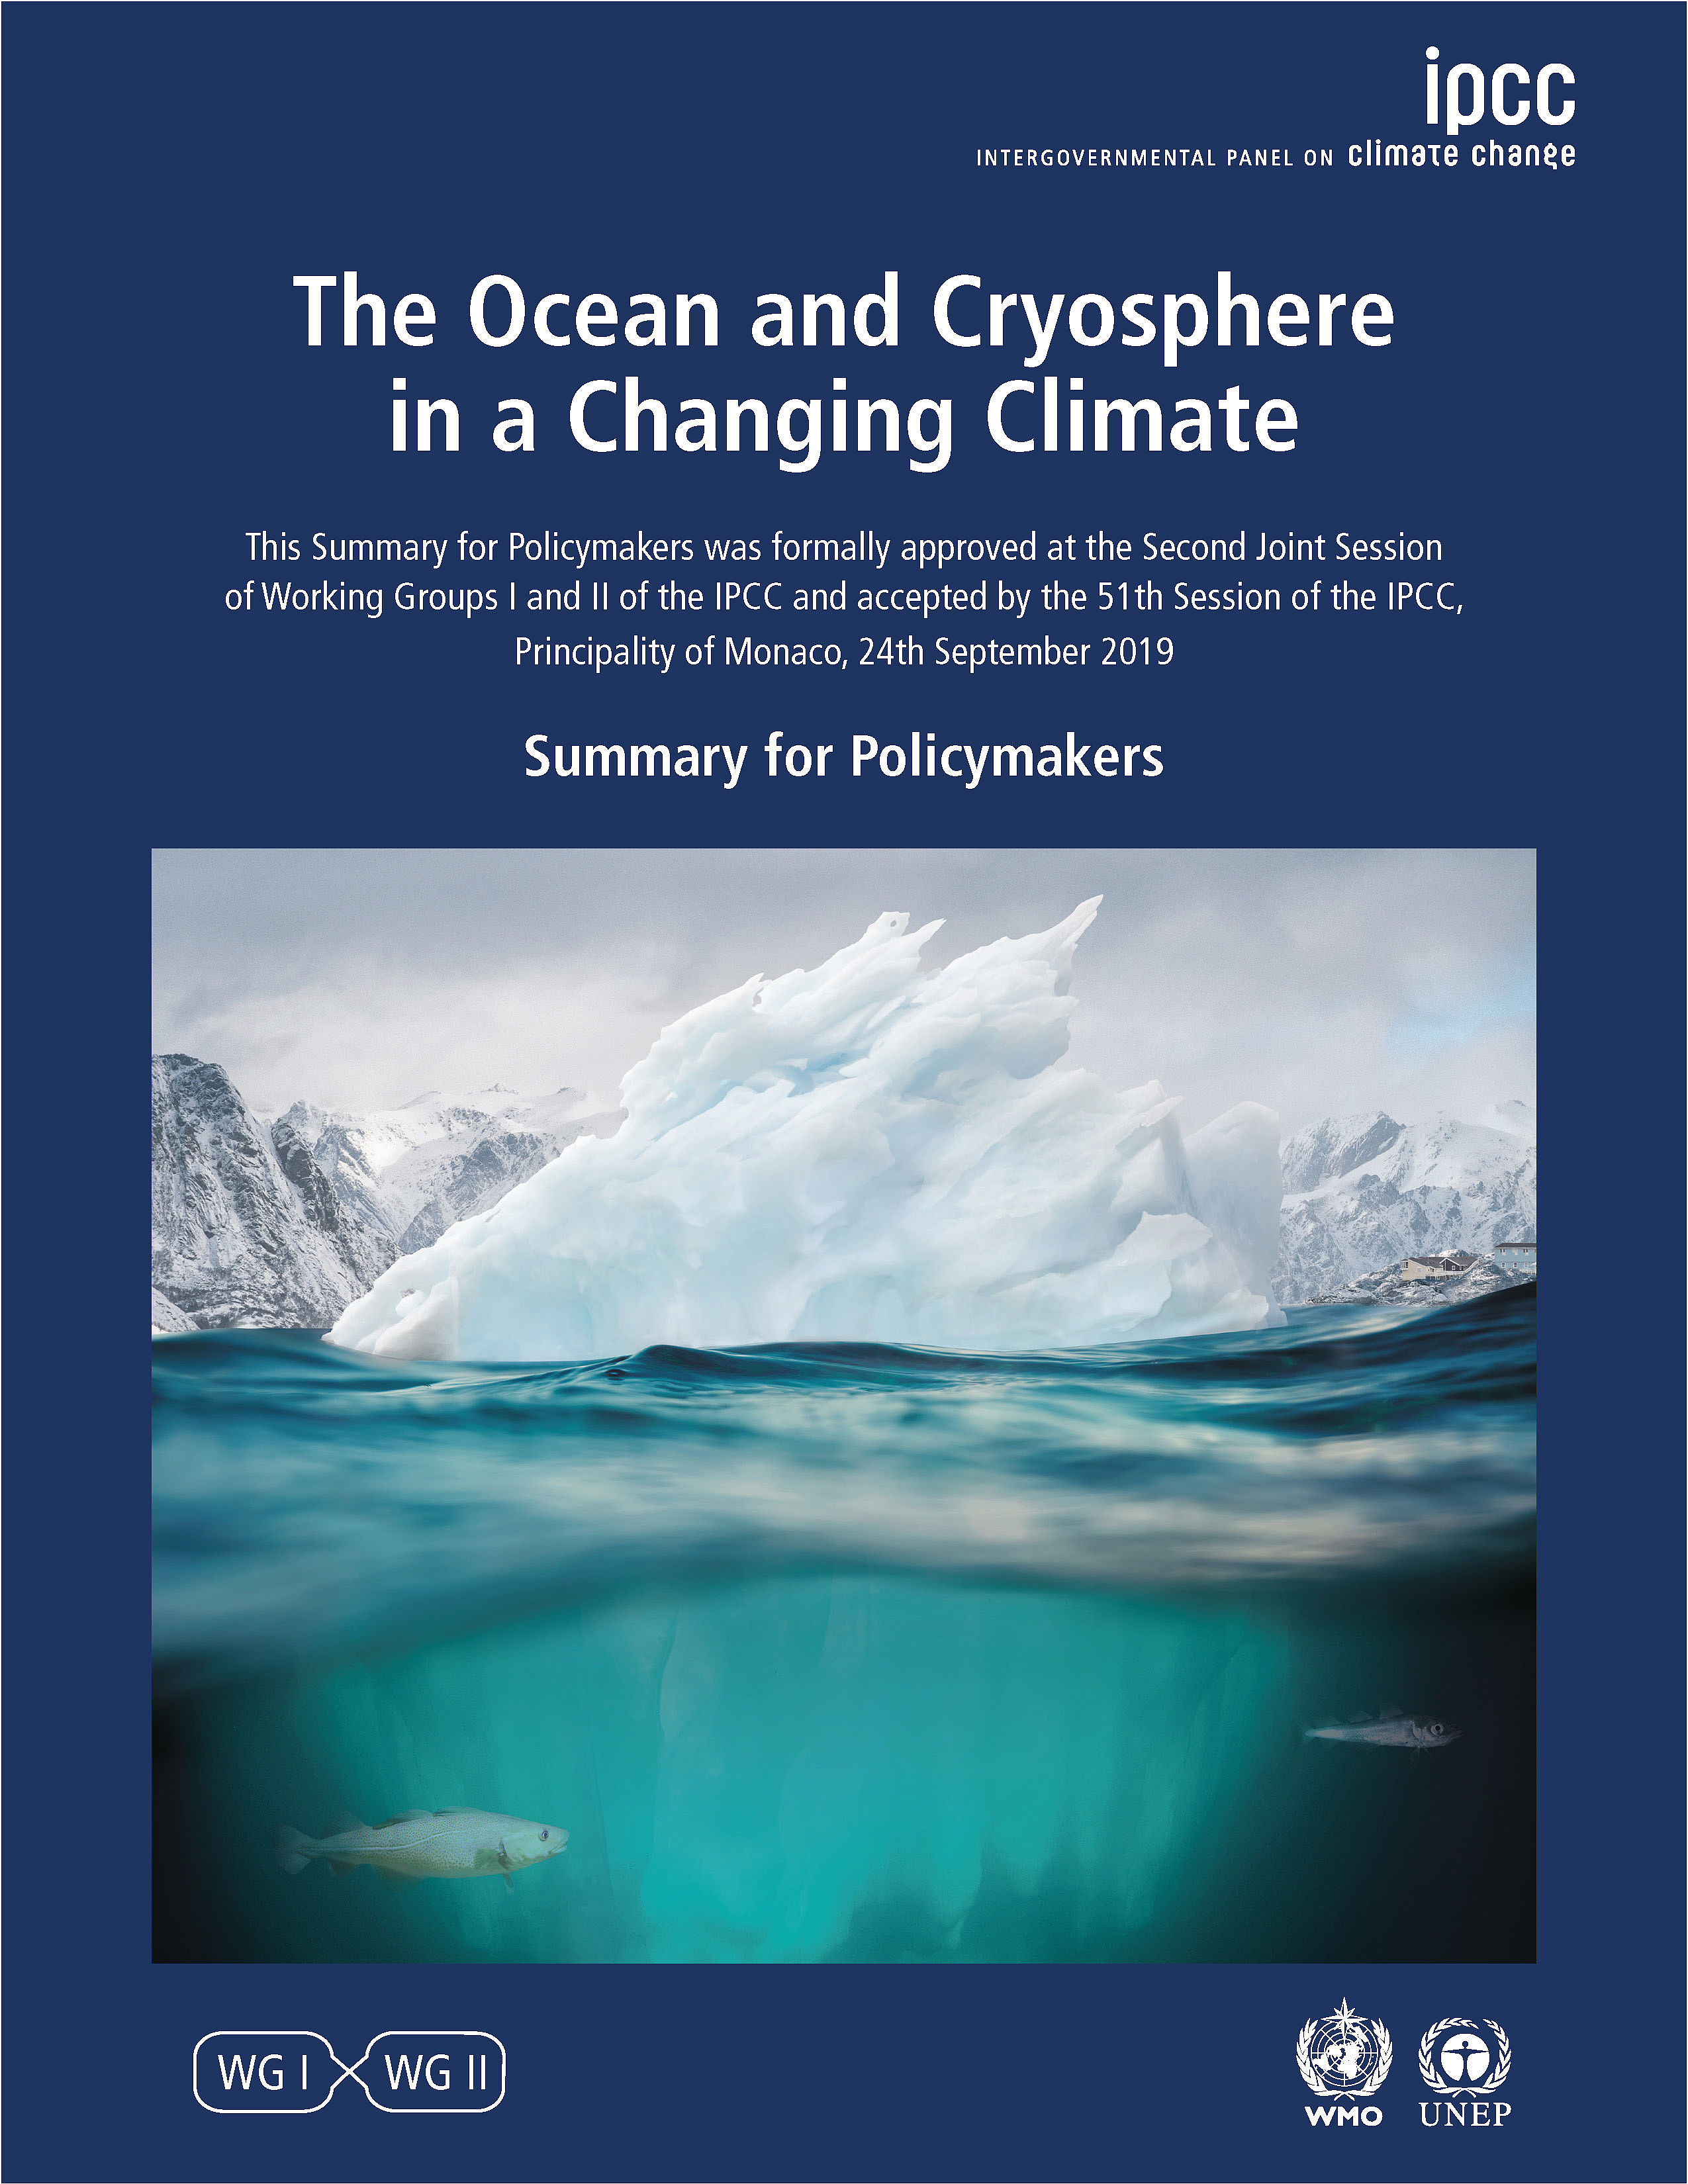 IPCC Special Report on the Ocean and Cryosphere in a Changing Climate